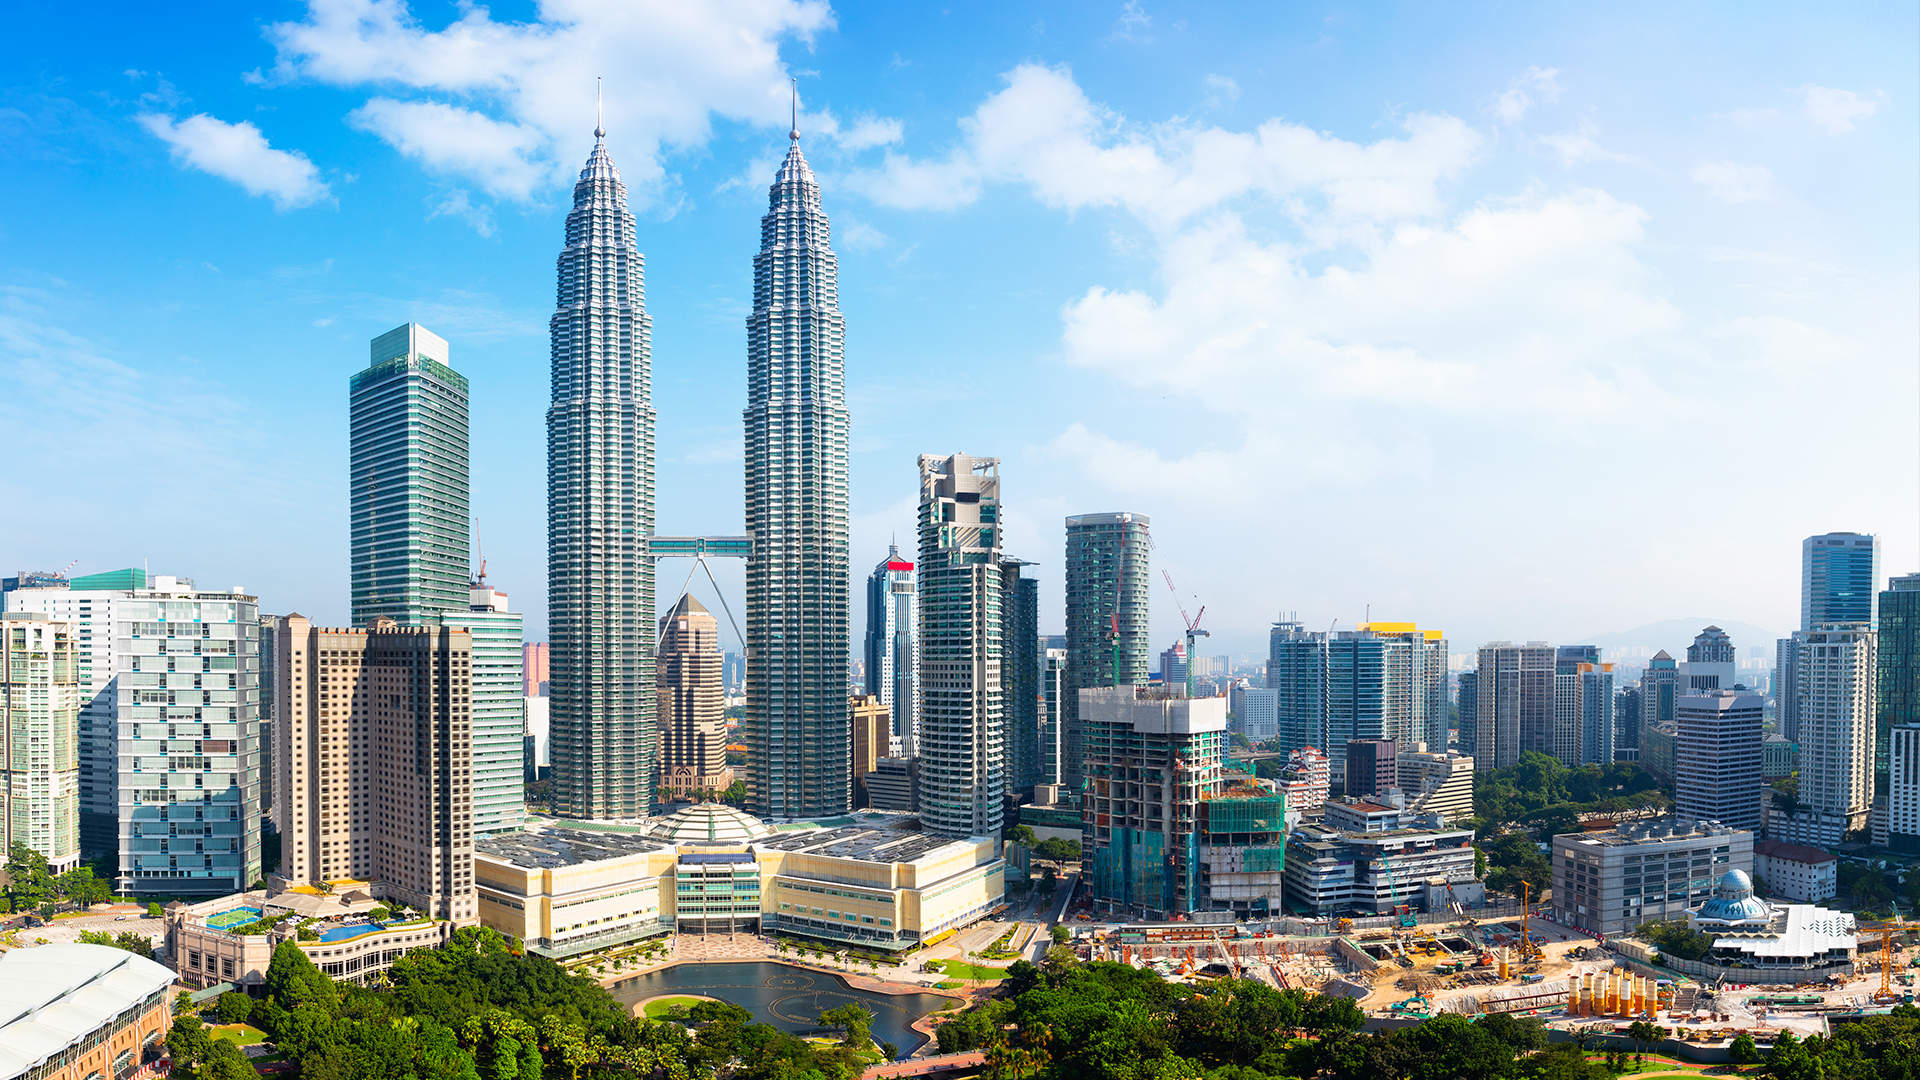 Skyline of Kuala Lumpur with Petronas Towers in forefront